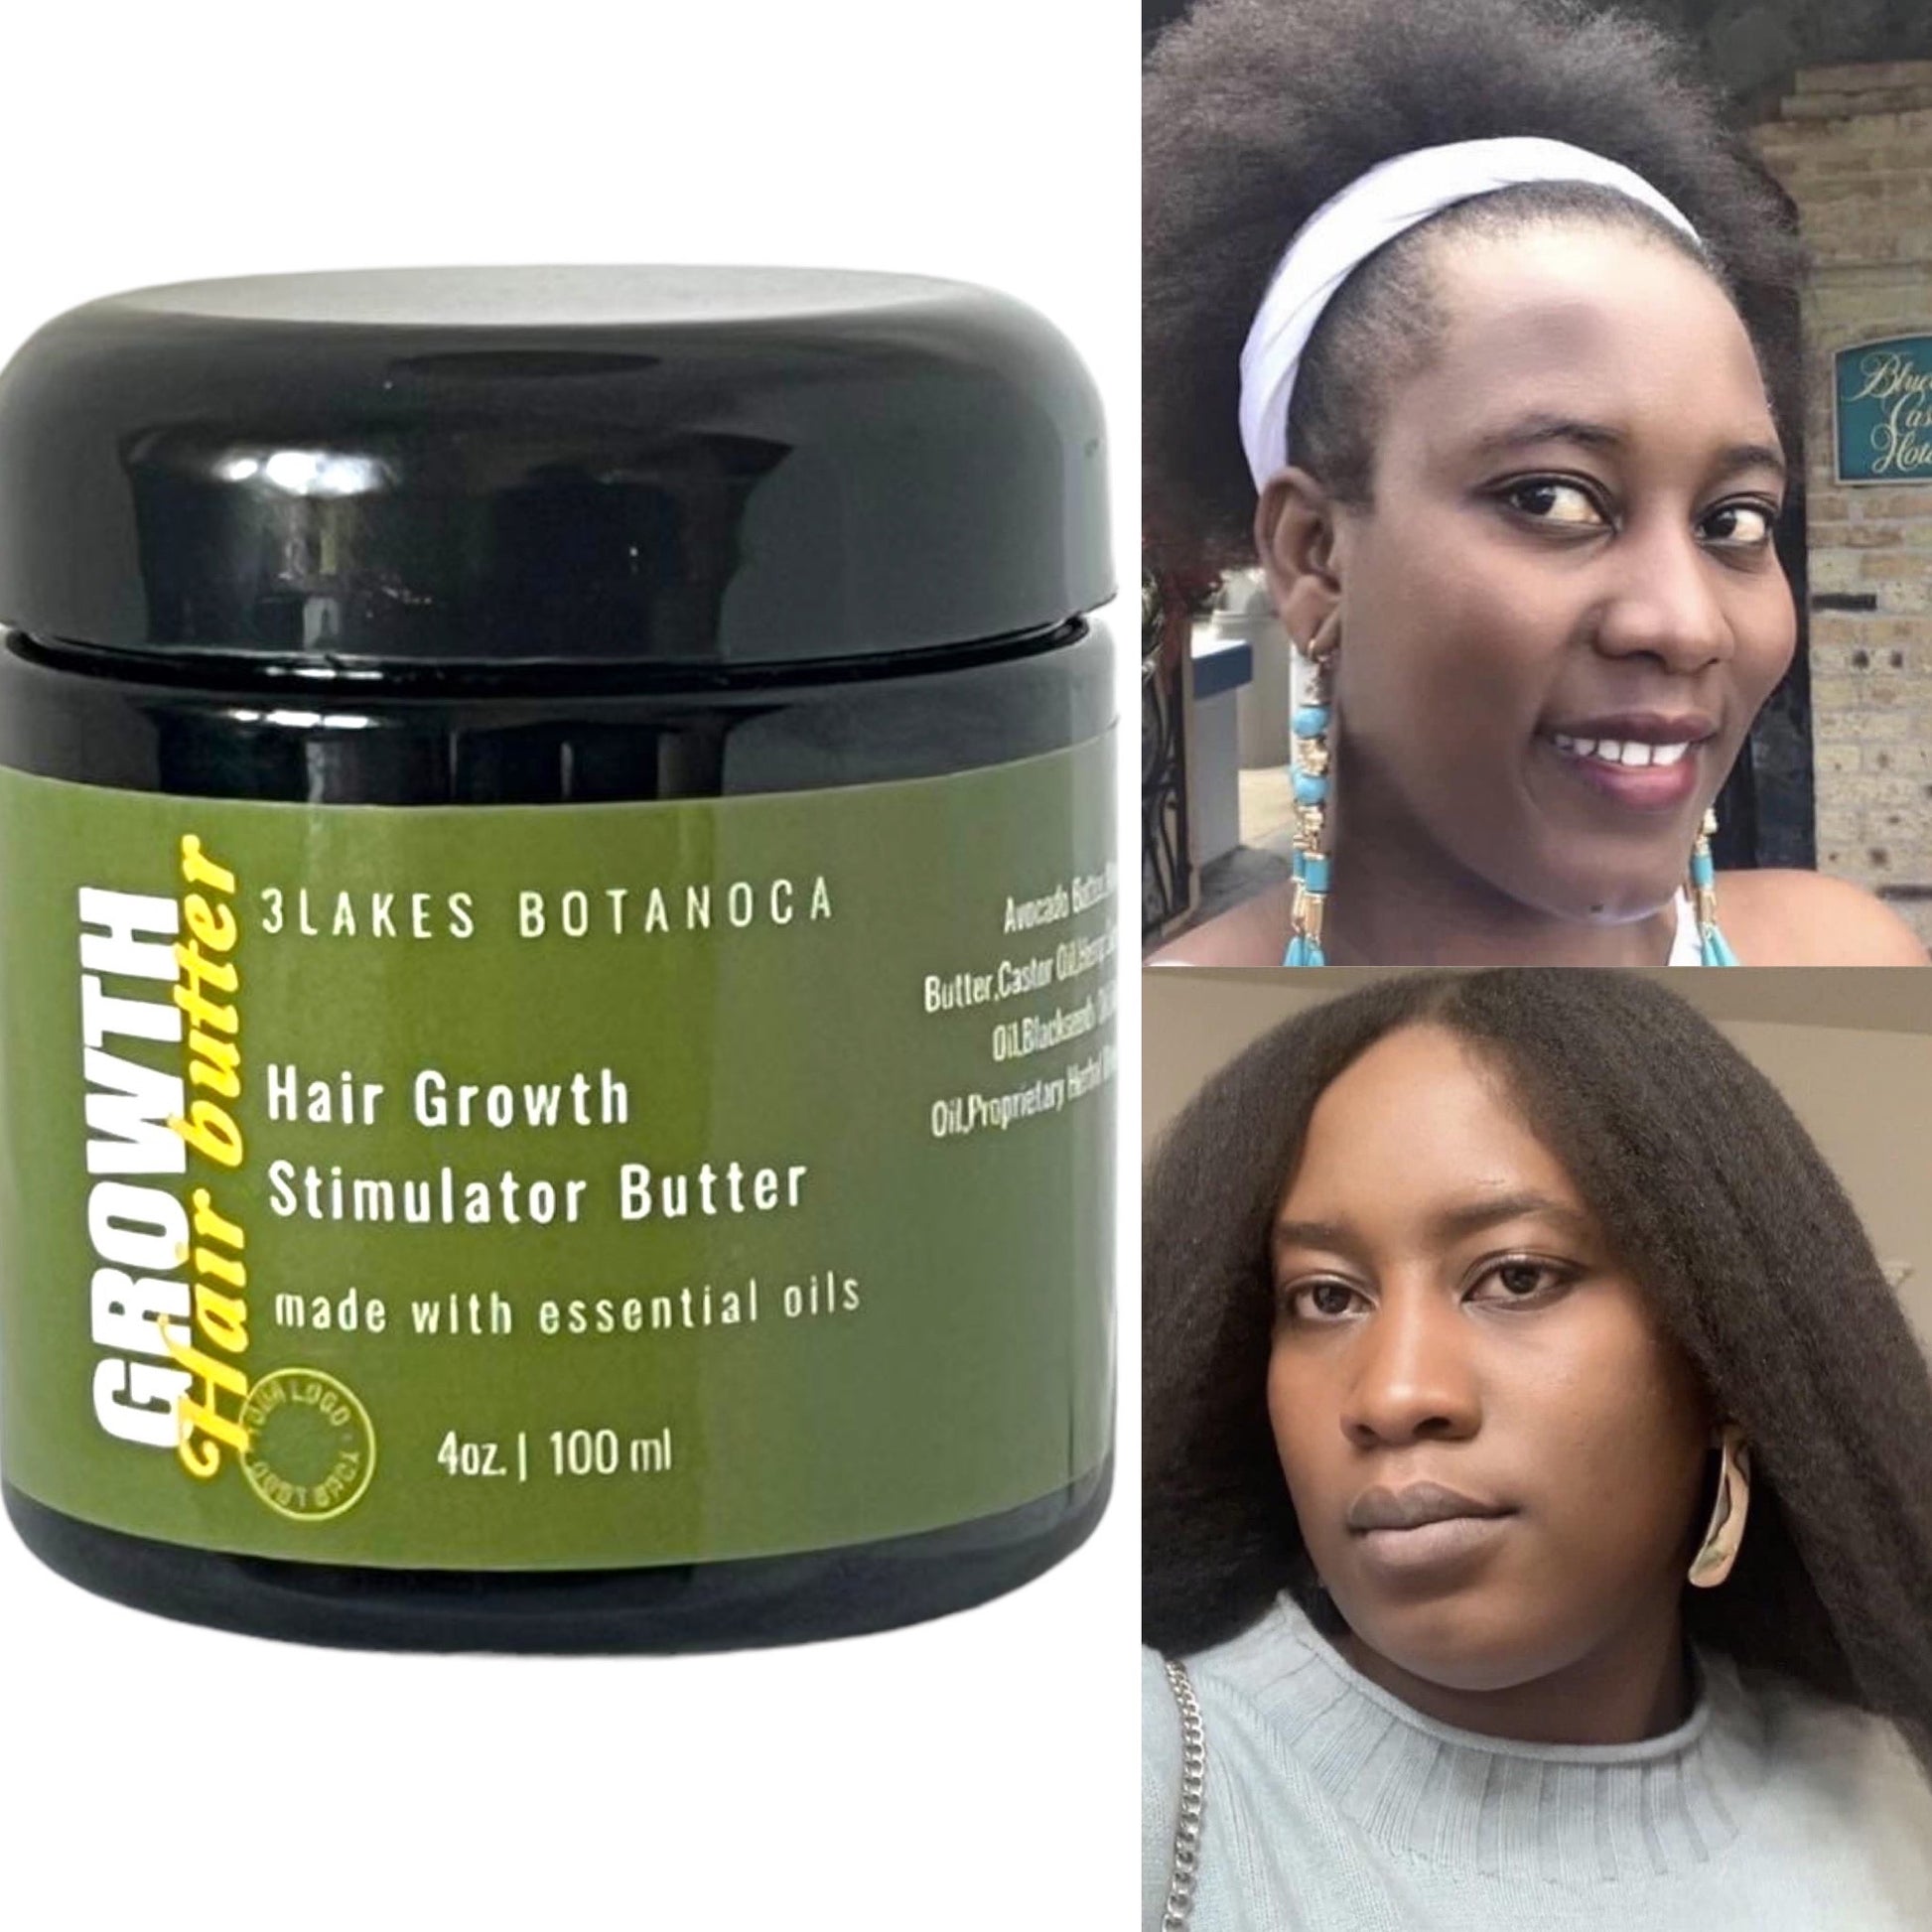 This<strong> 100% natural hair butter</strong> is packed with a blend of herbs, butters, oils and actives that are known to help achieve healthier, longer, thicker looking hair. The herbal blend mix is infused in oils to give you all the max benefits those herbs have to offer in a smooth butter. Patience and consistency are key to great results!&nbsp;<strong>A little butter goes a long way!</strong>